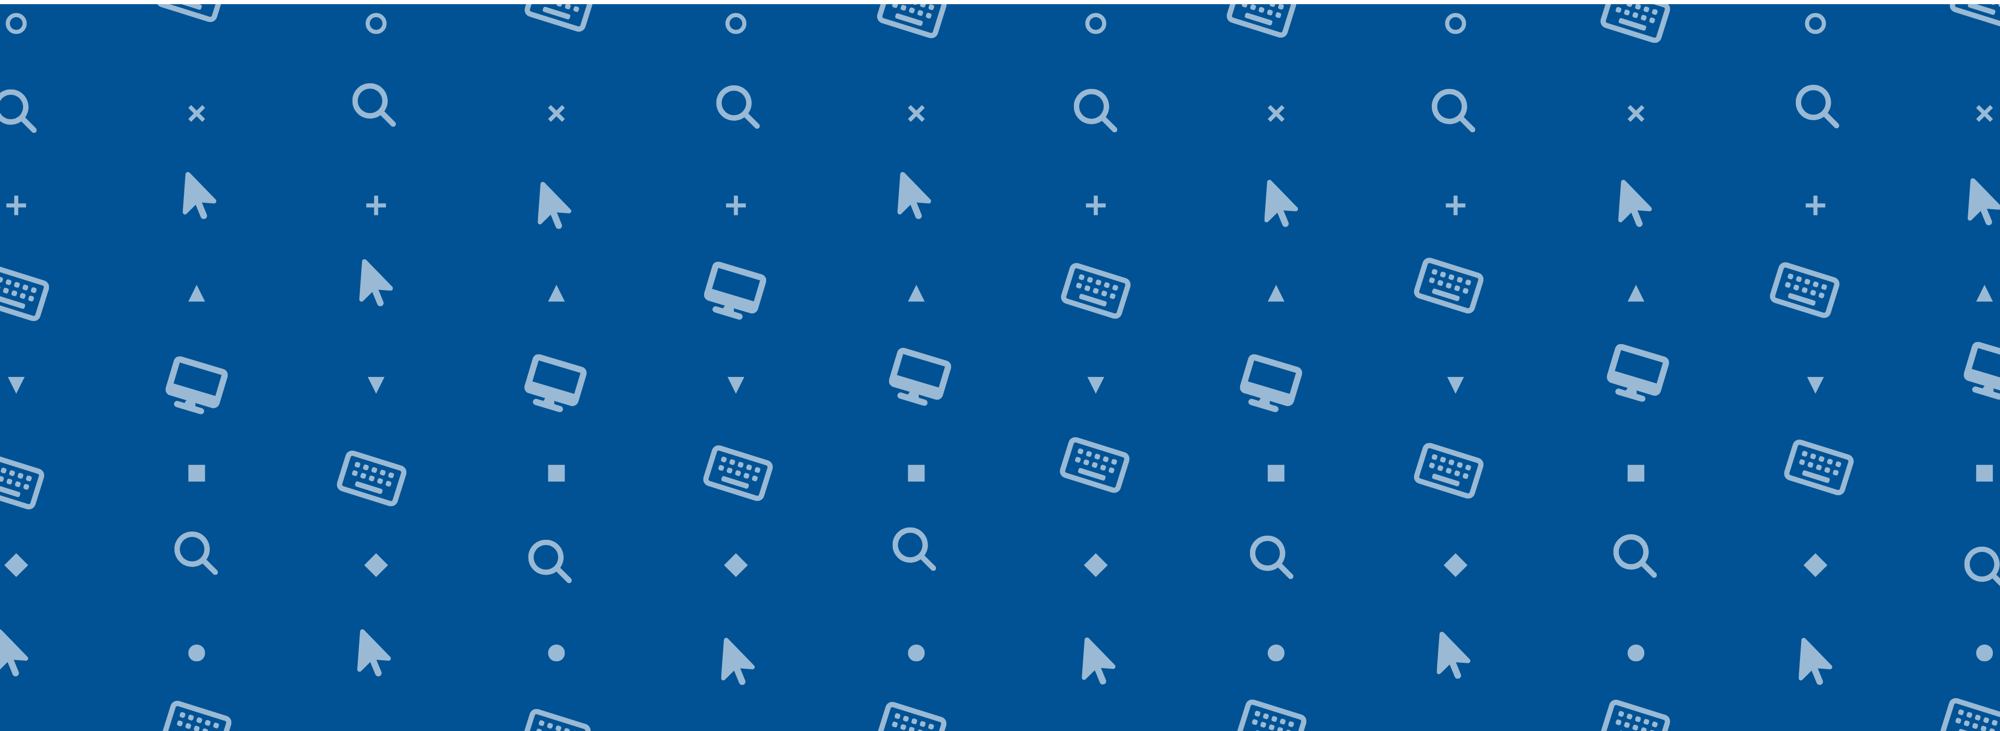 onboarding icon background-1